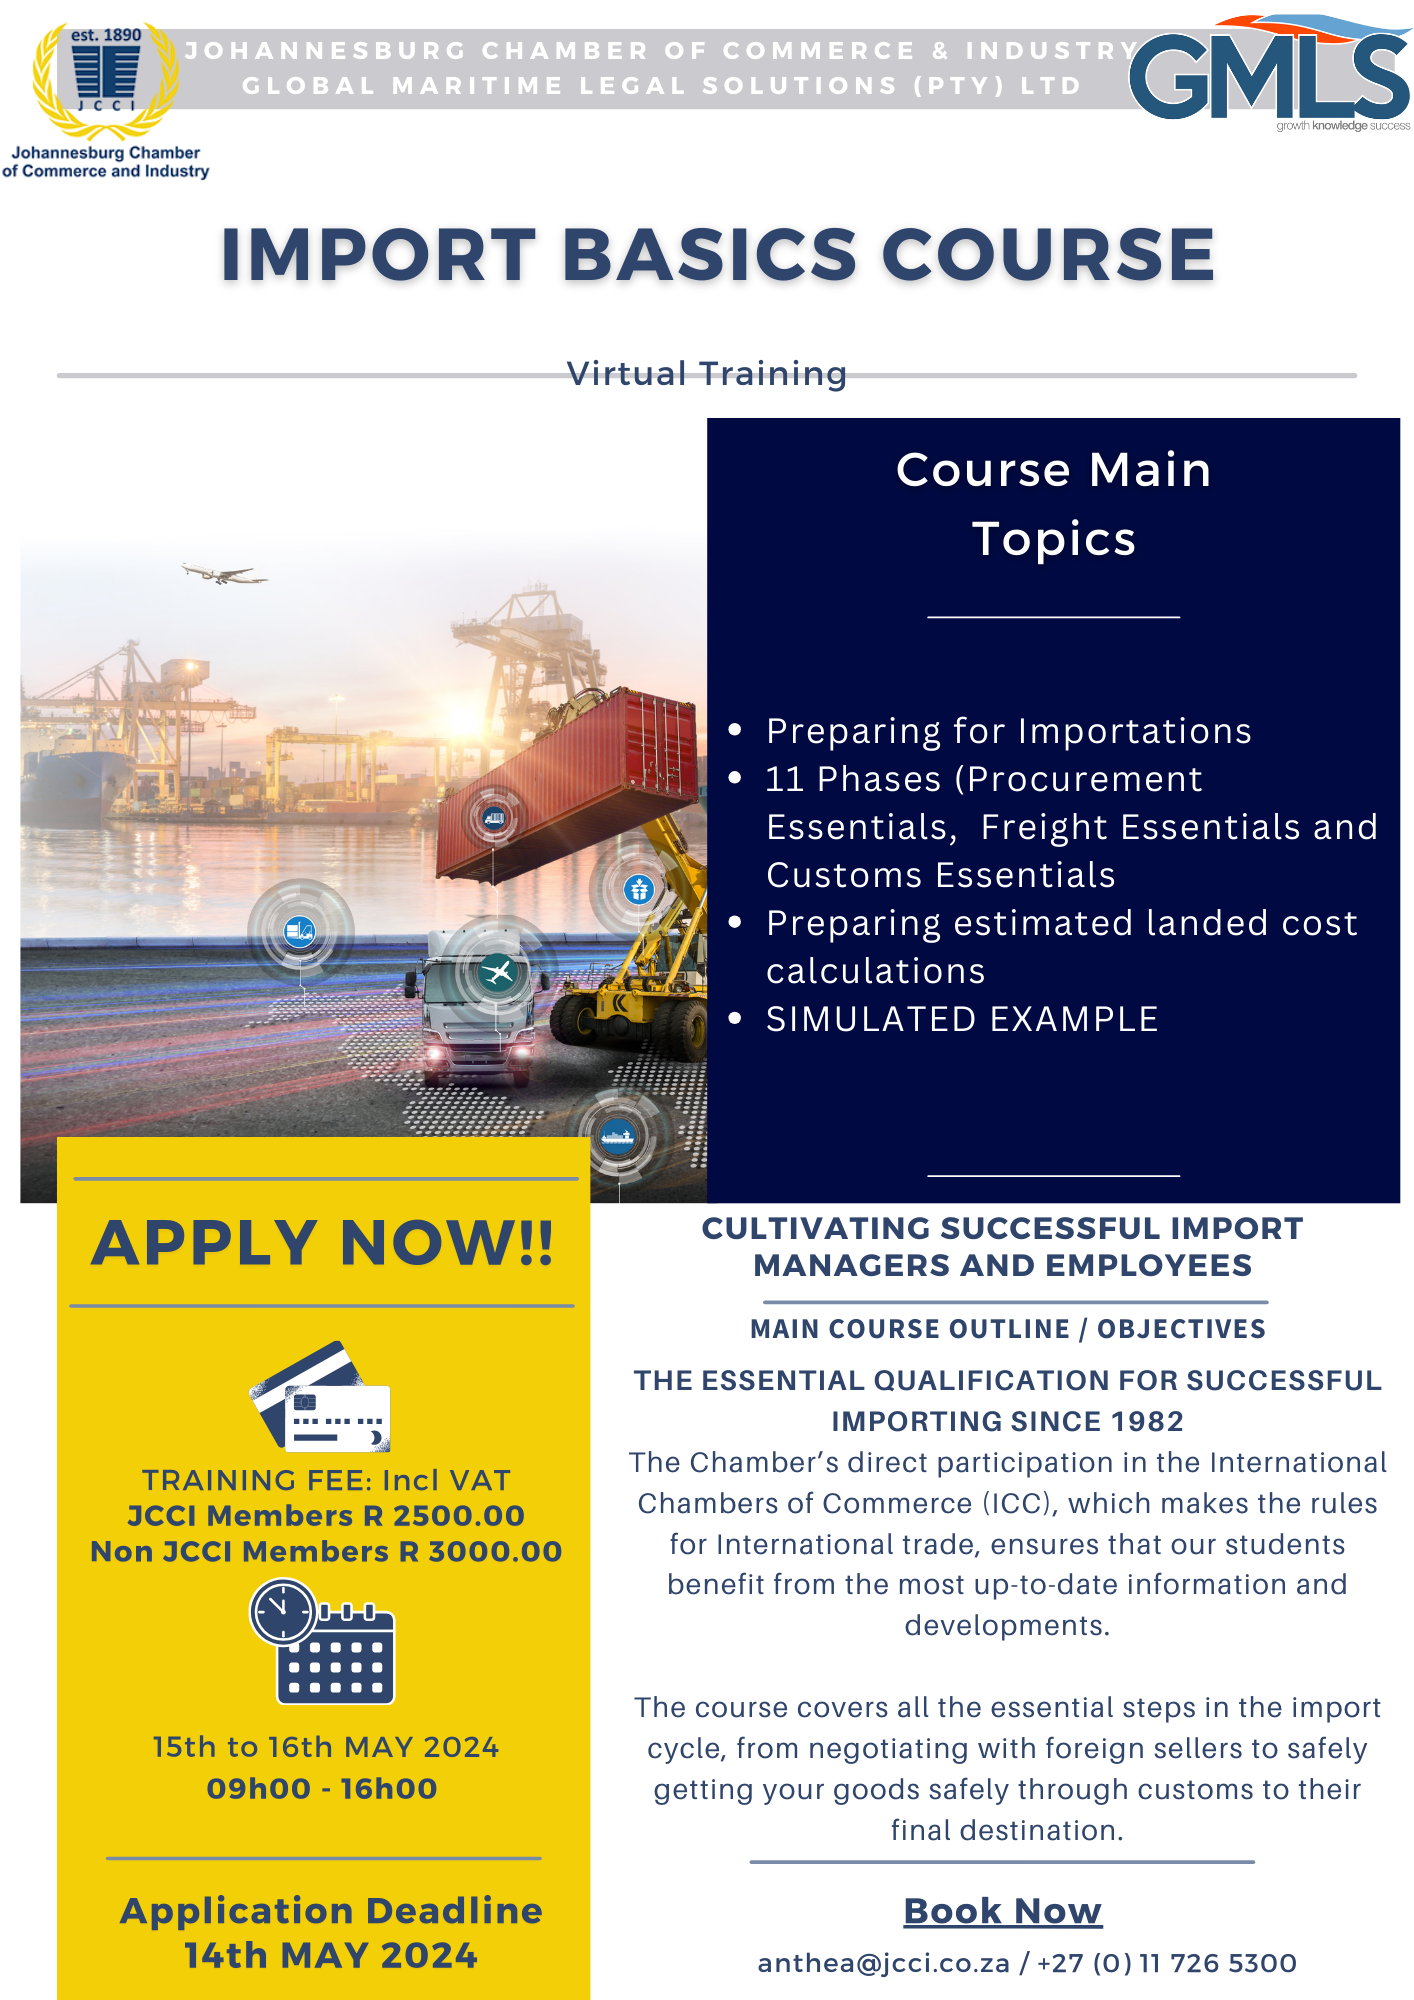 IMPORT BASICS COURSE - 15th to 16th MAY 2024